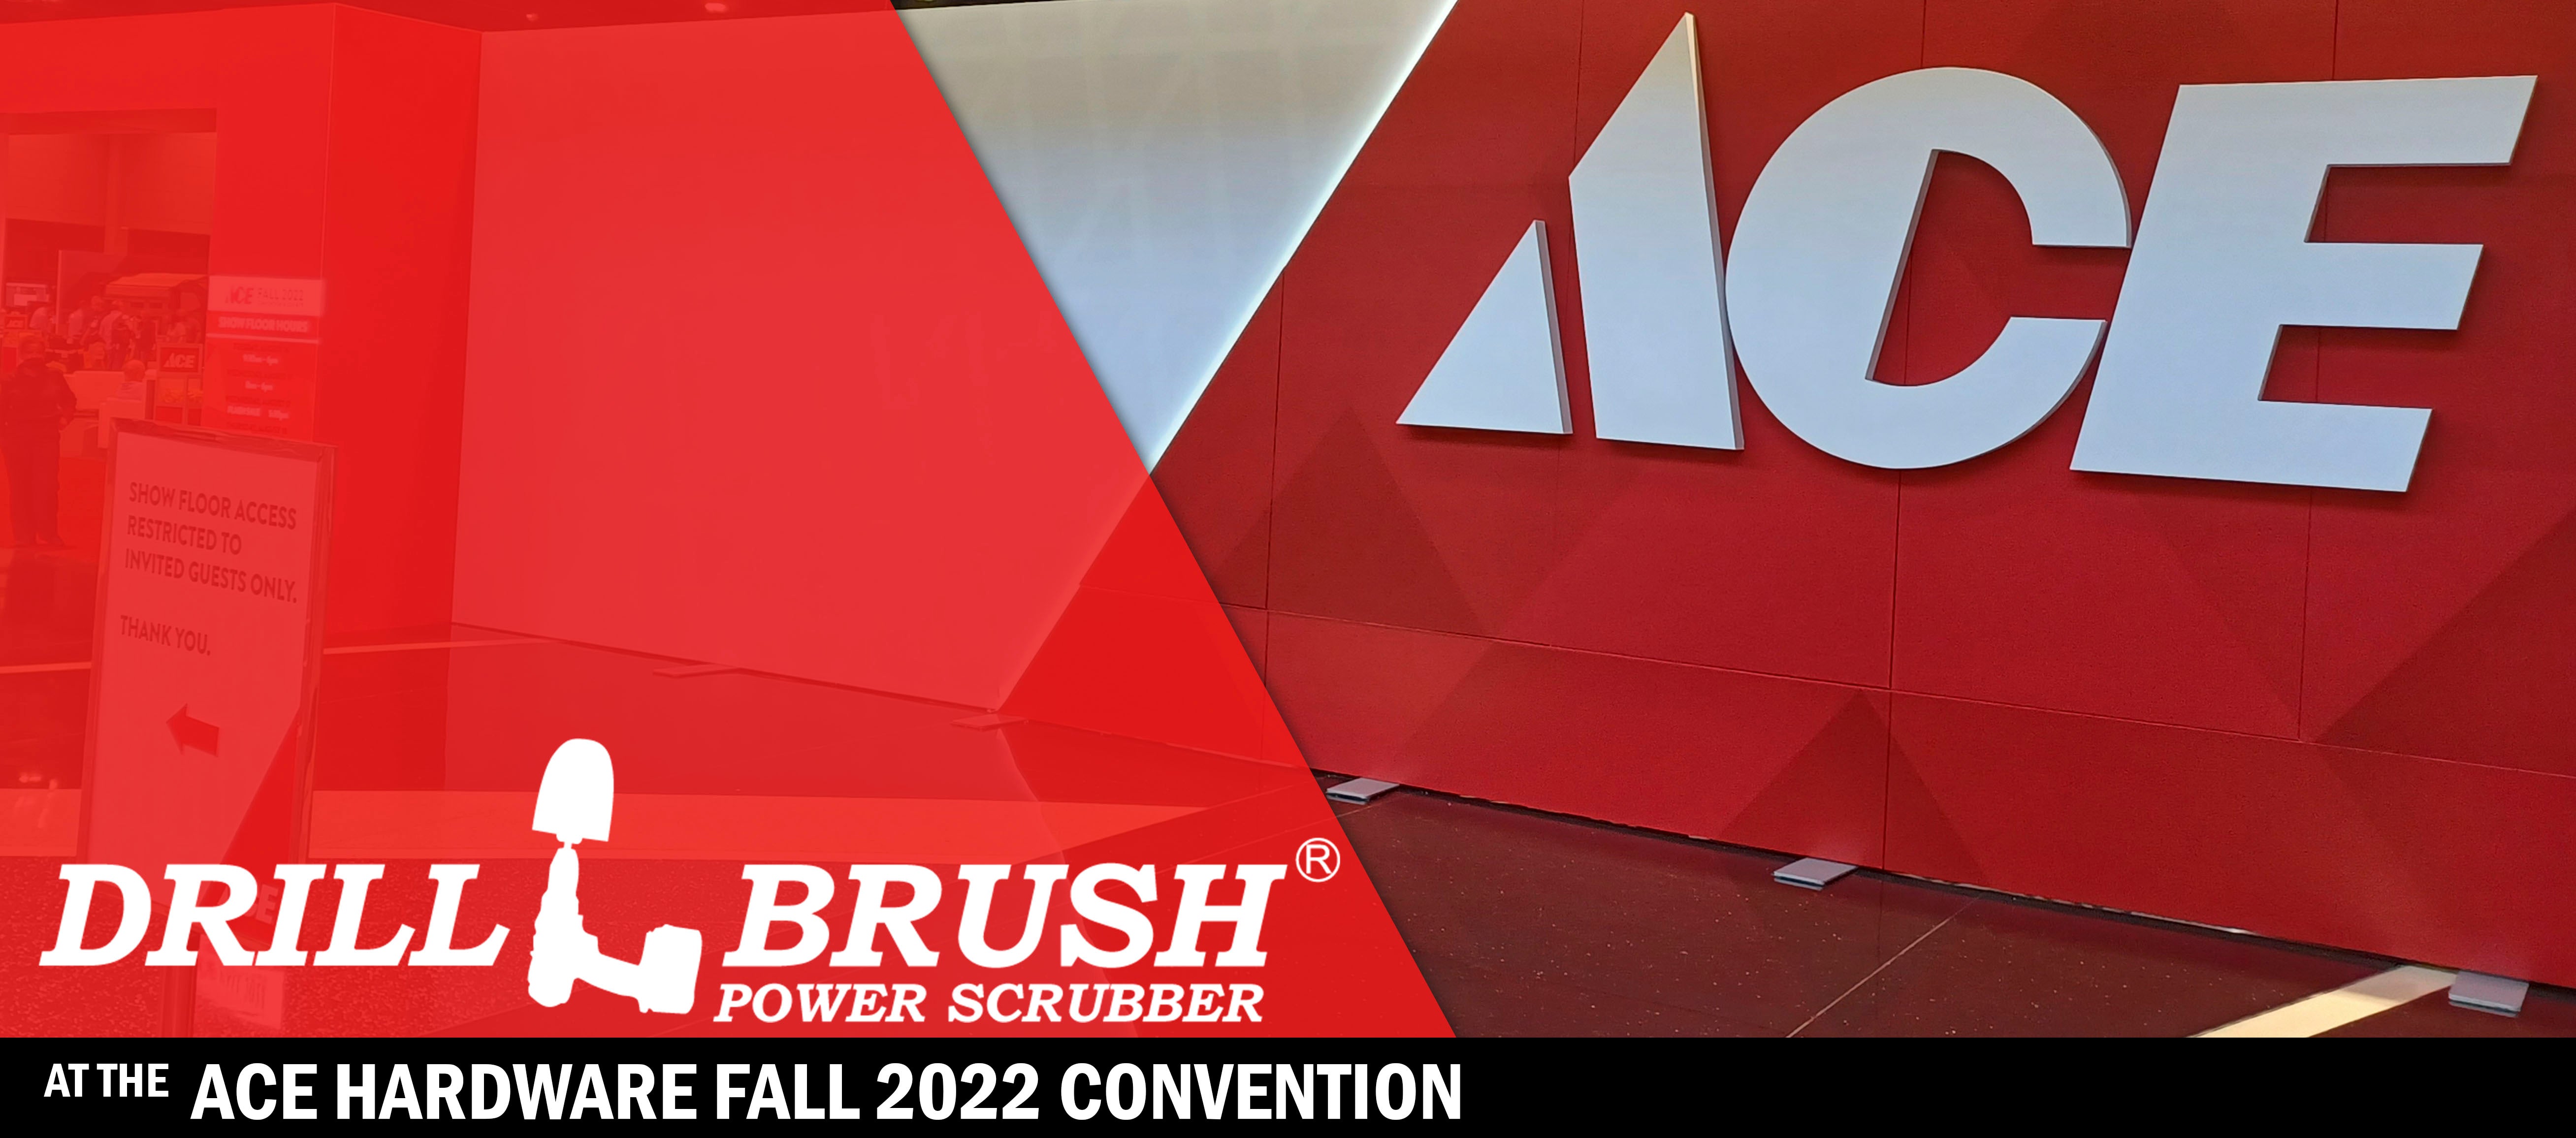 Drillbrush at the ACE Hardware Fall 2022 Convention